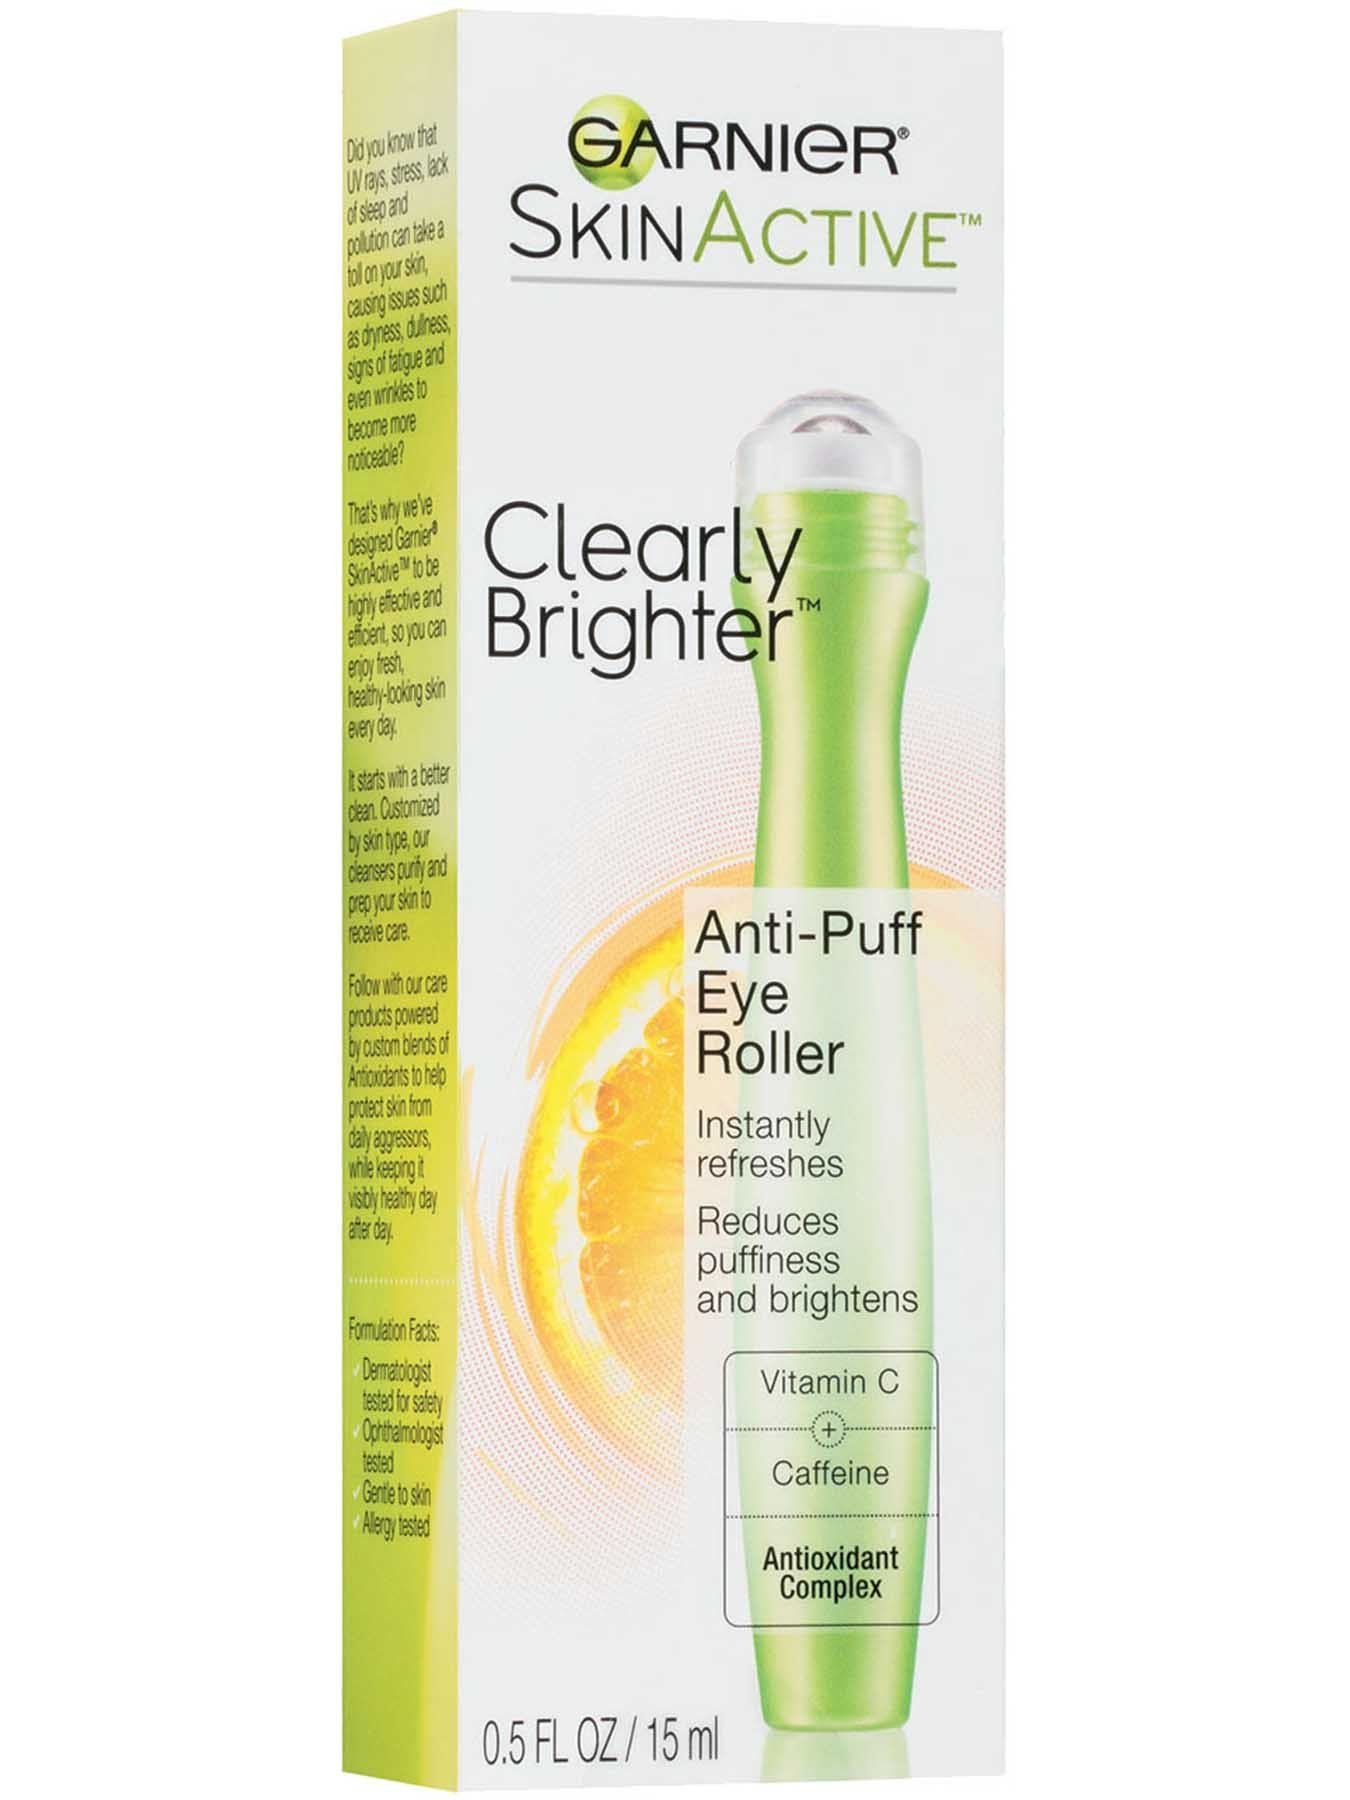 Right Side view of Clearly Brighter Anti-Puff Eye Roller.